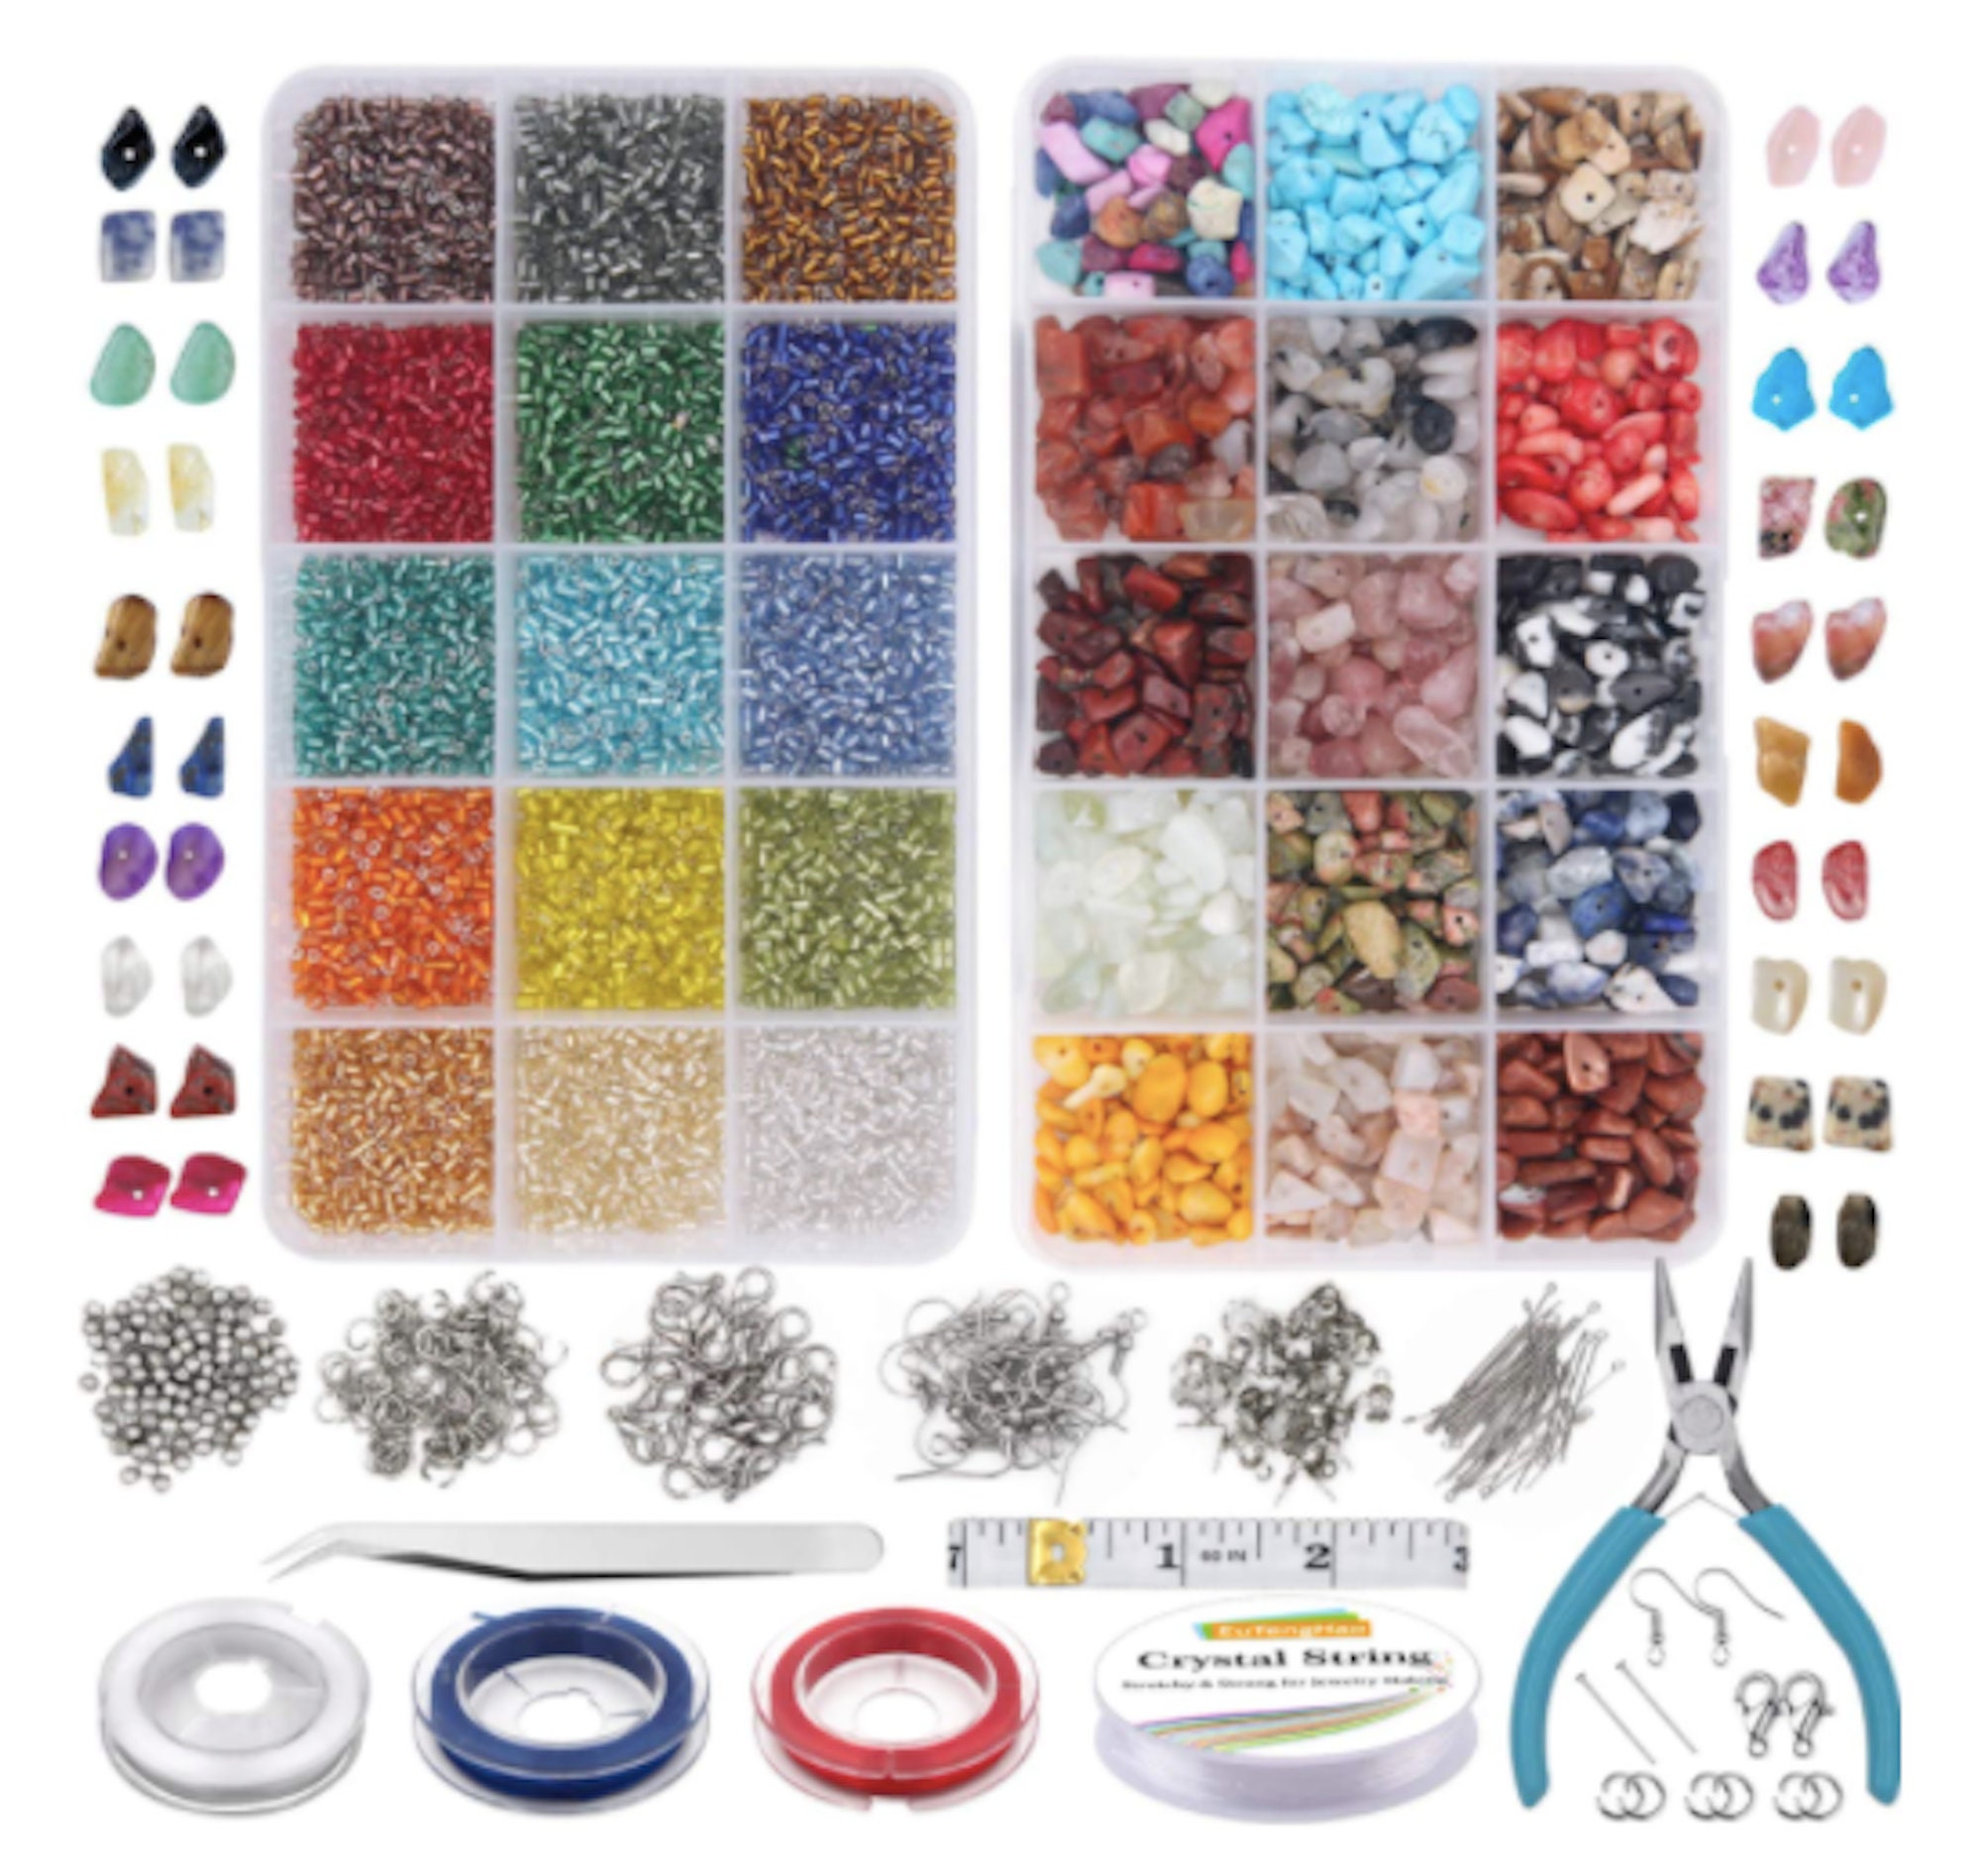 Jewelry Making Kits & Supplies That Make Great Gifts